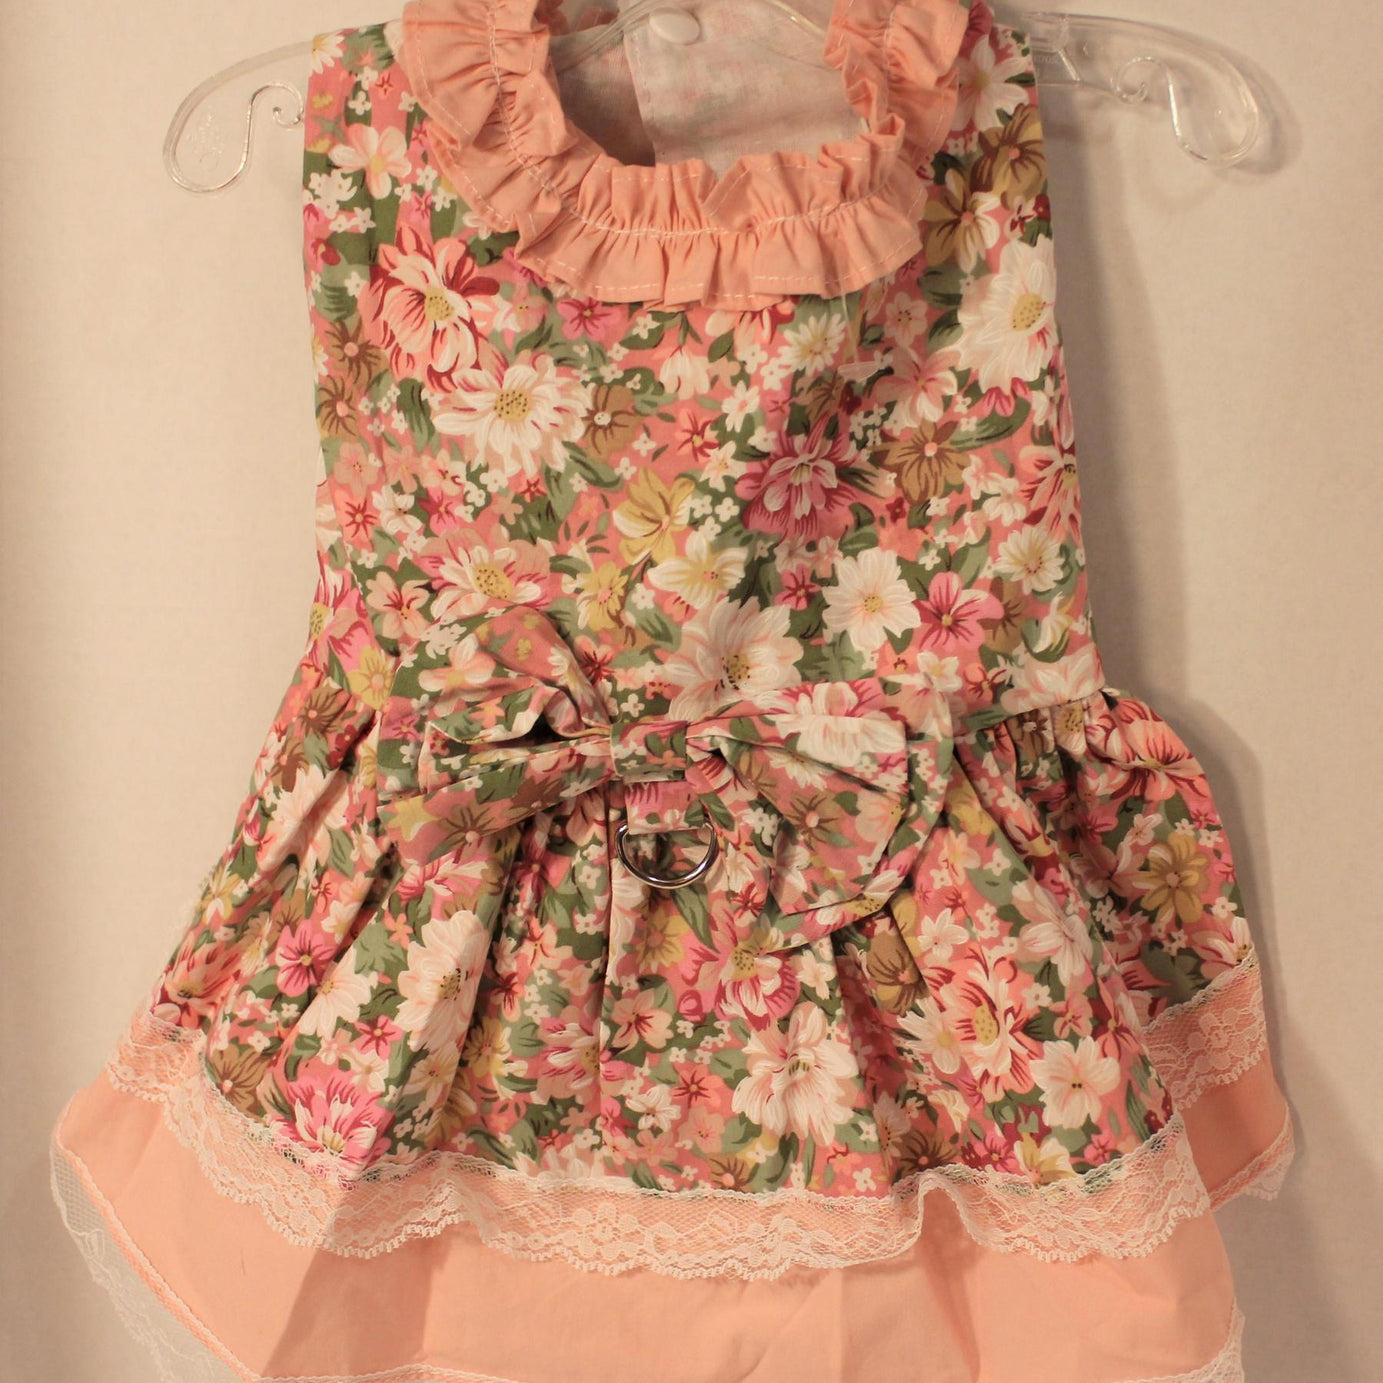 Peach dress with flowers, lace and D ring - Mr Mochas Pet Supplies